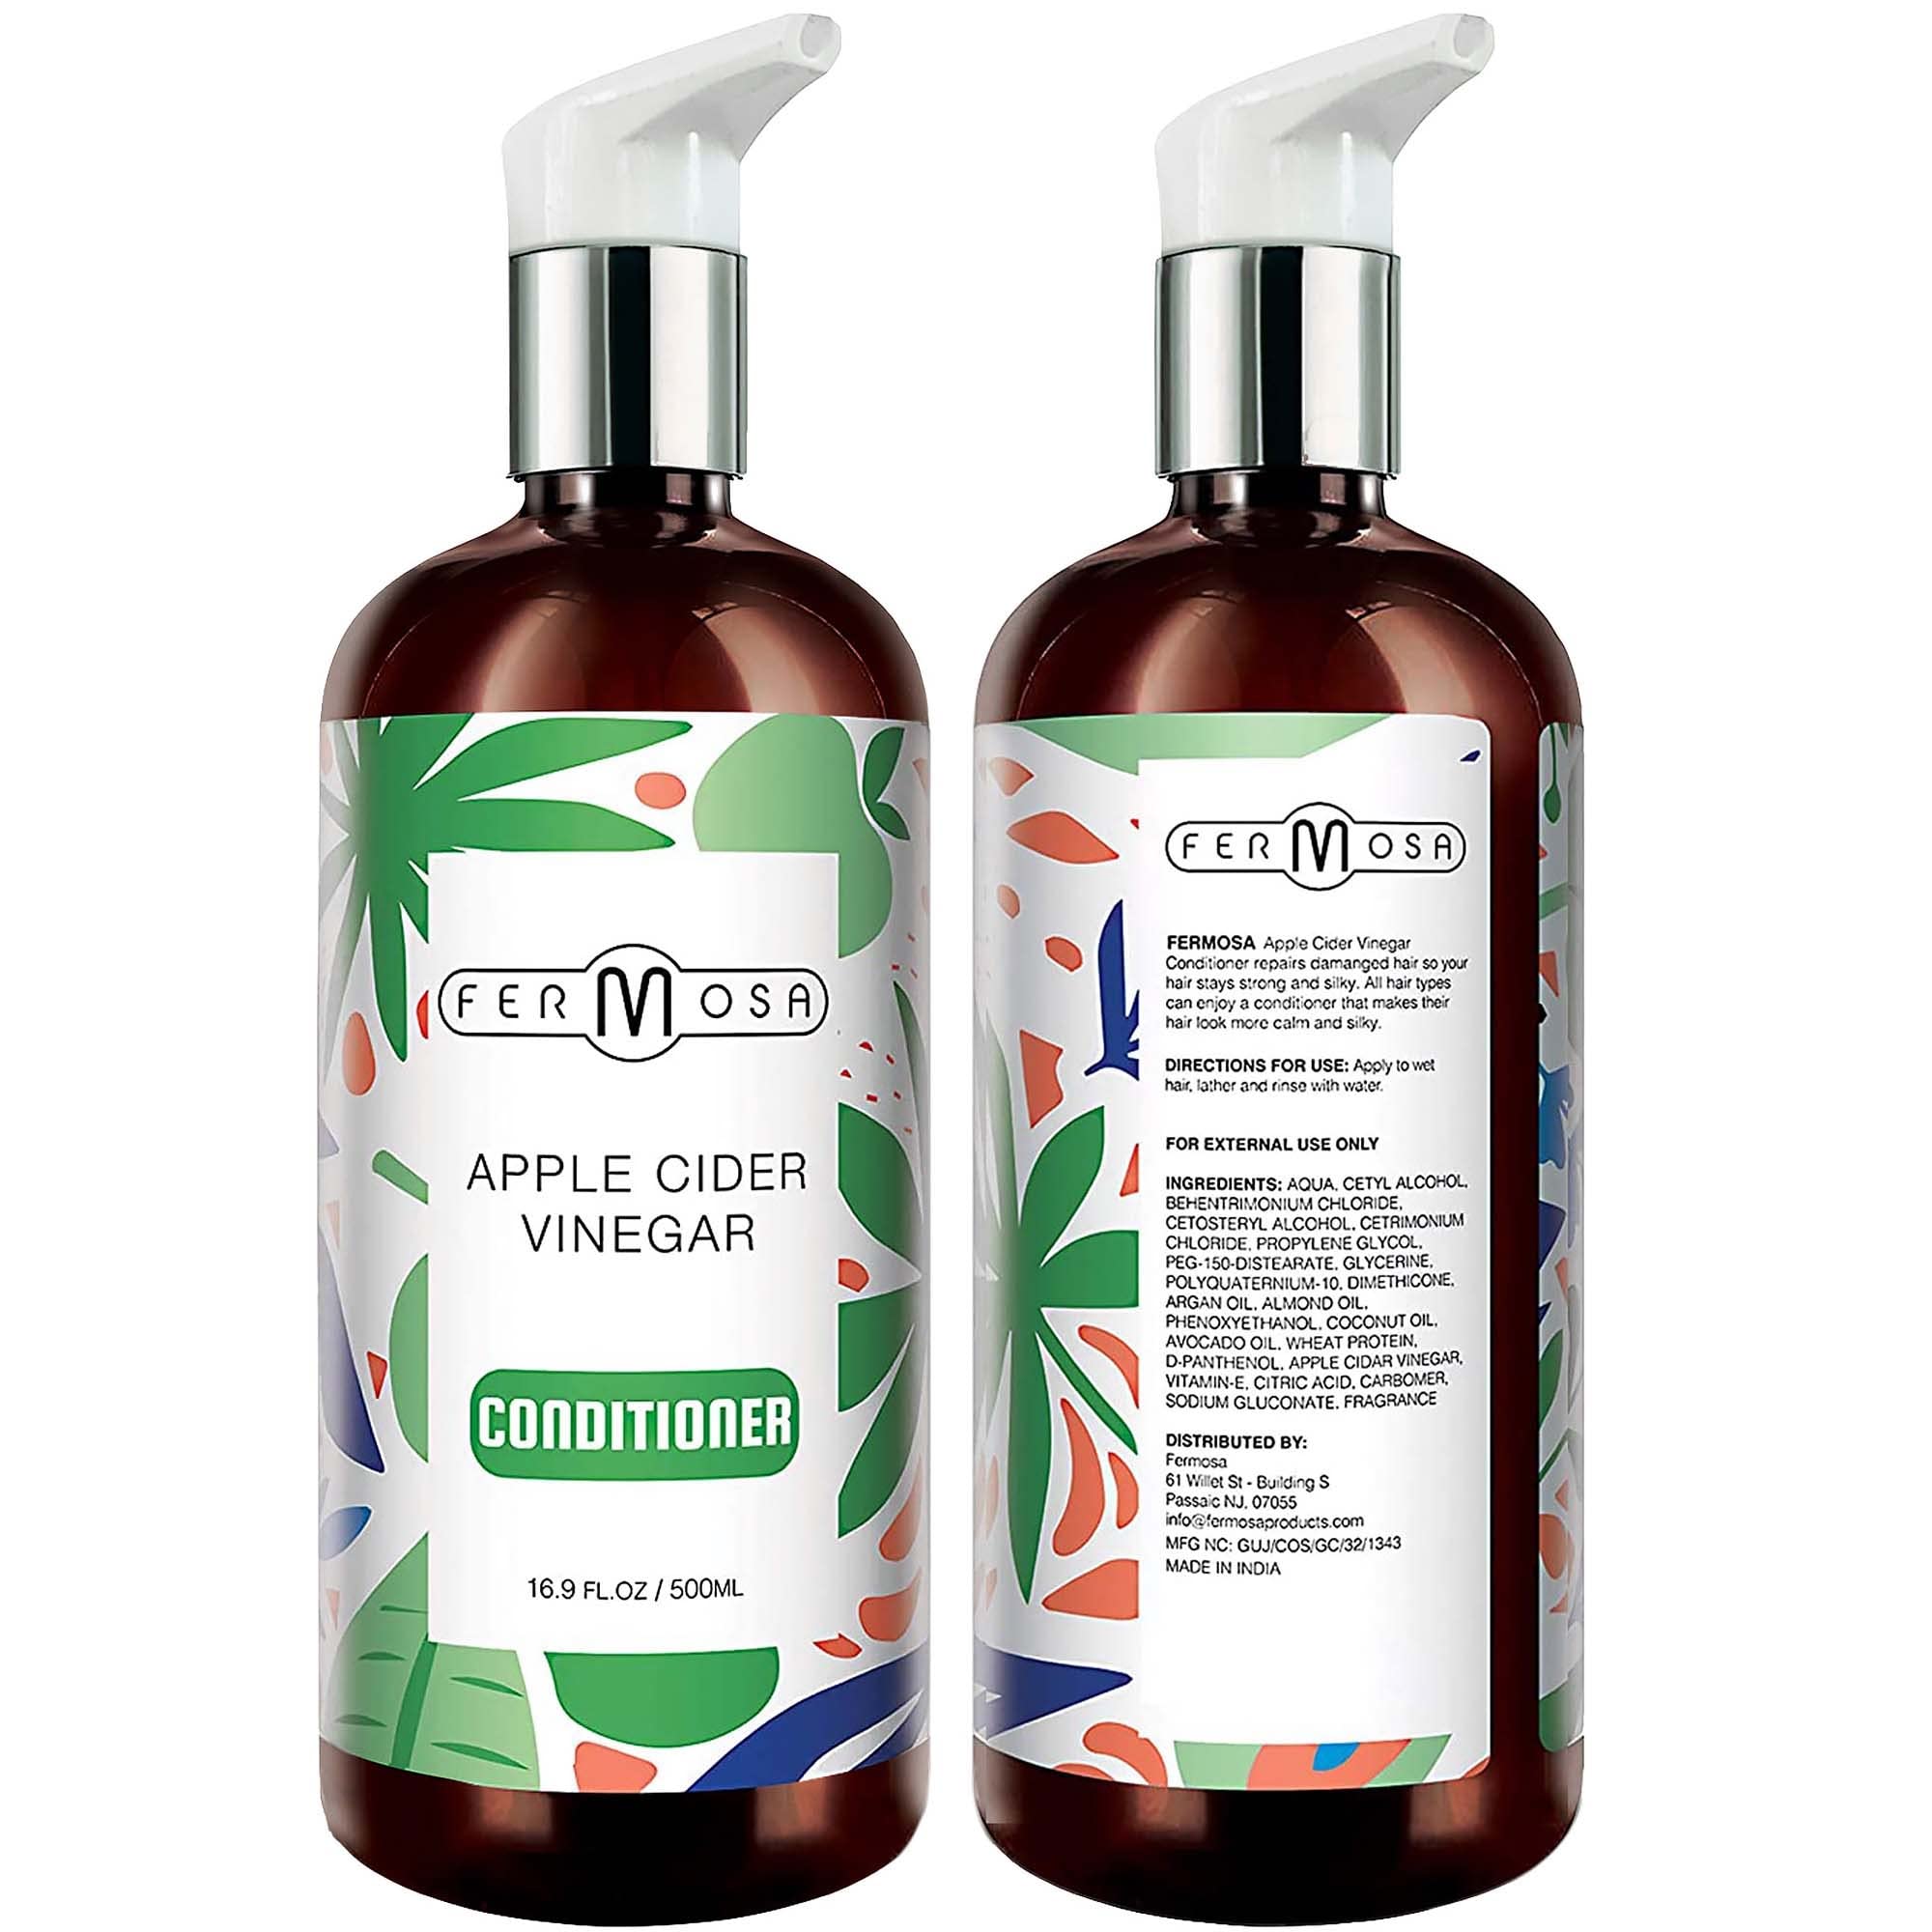 Fermosa Apple Cider Vinegar Conditioner - Moisturizing & Soothing Scalp Treatment, Anti Dandruff, Reduces Itchiness & Frizz, Adds Shine & Volume, Sulfate Free, 16.9oz/500ml